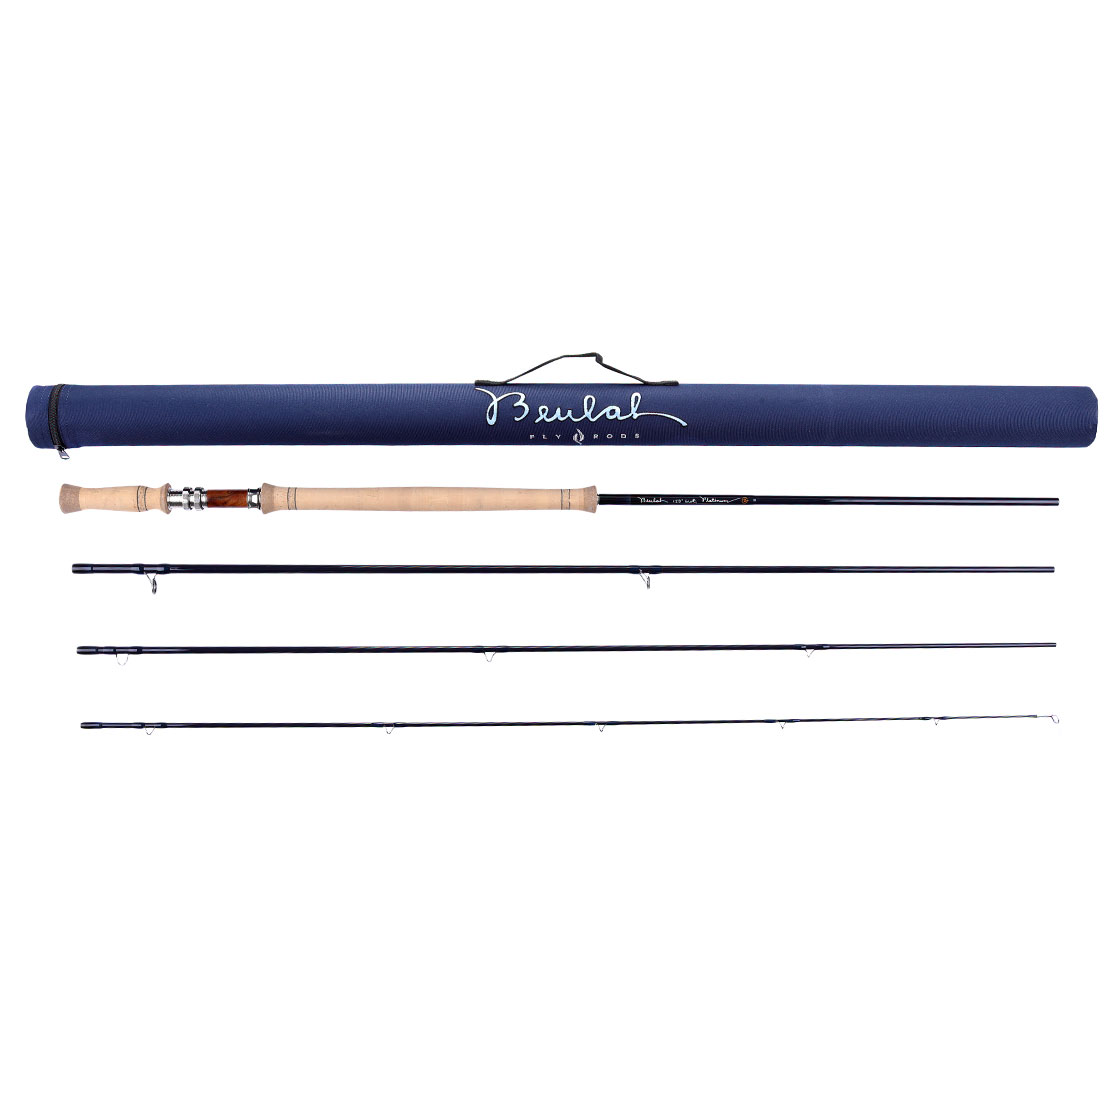 fly fishing spey rod cork grip, fly fishing spey rod cork grip Suppliers  and Manufacturers at